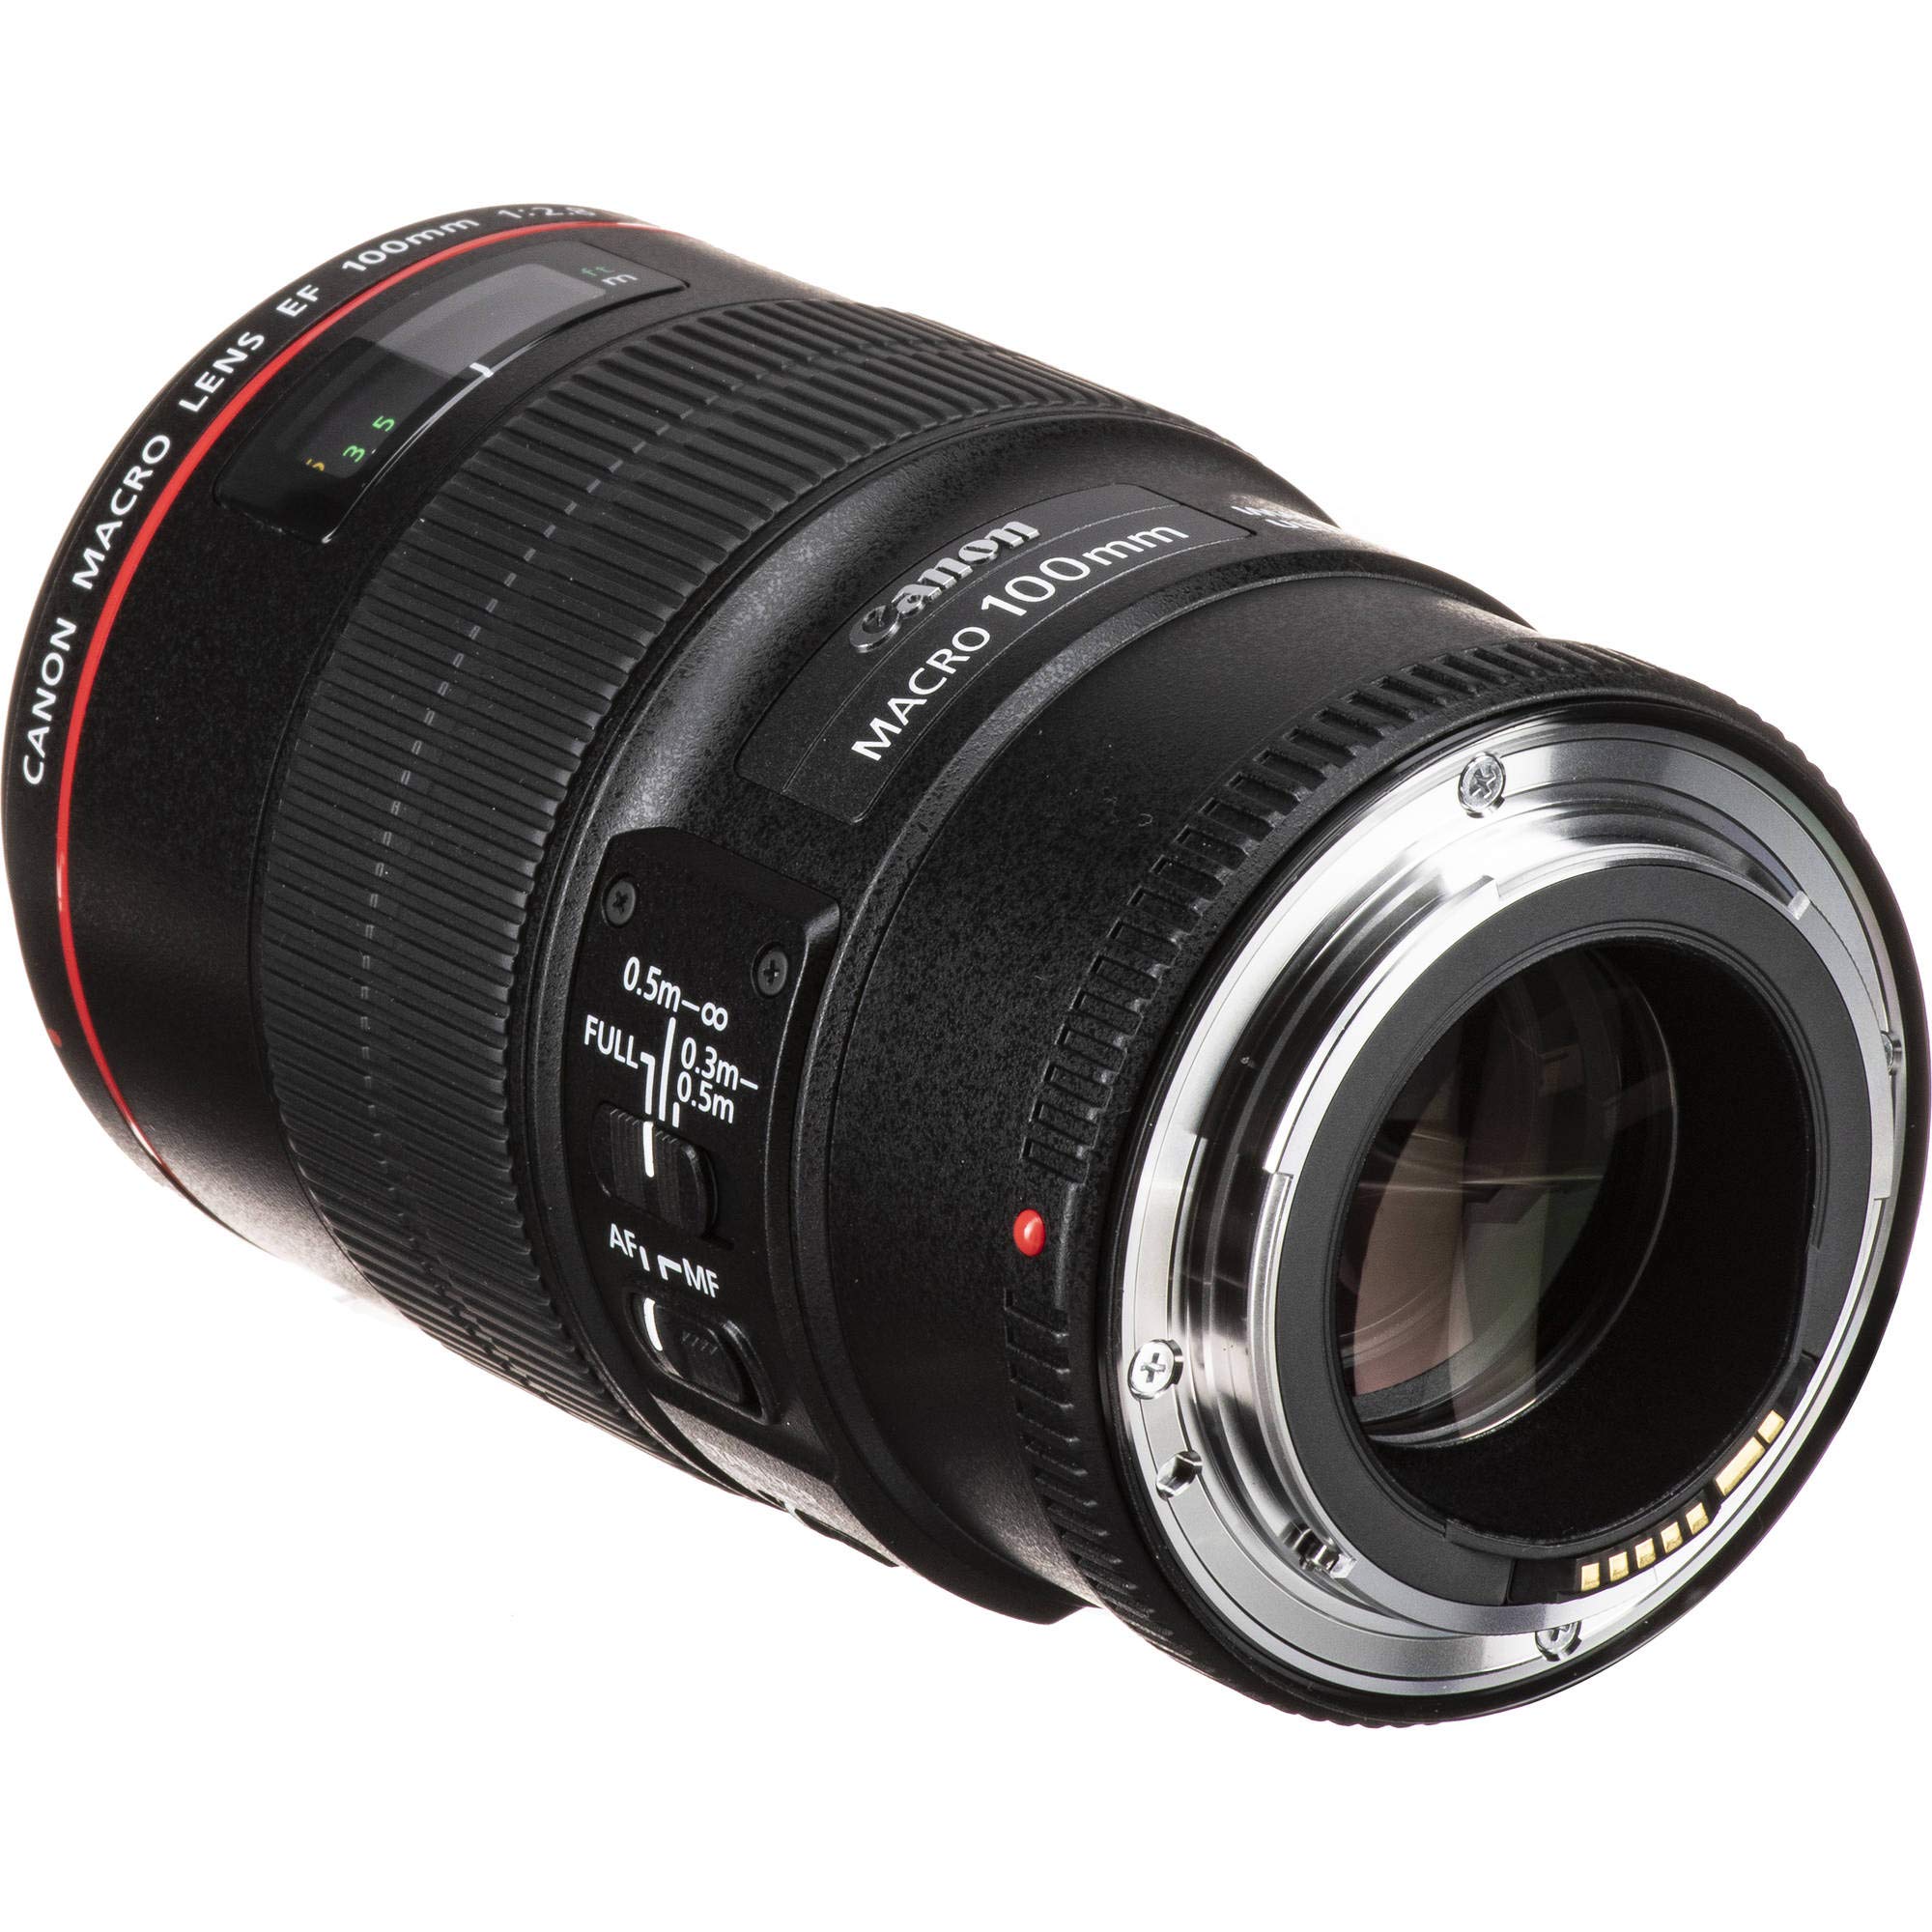 Canon EF 100mm f/2.8L Macro IS USM Lens With Cleaning Kit